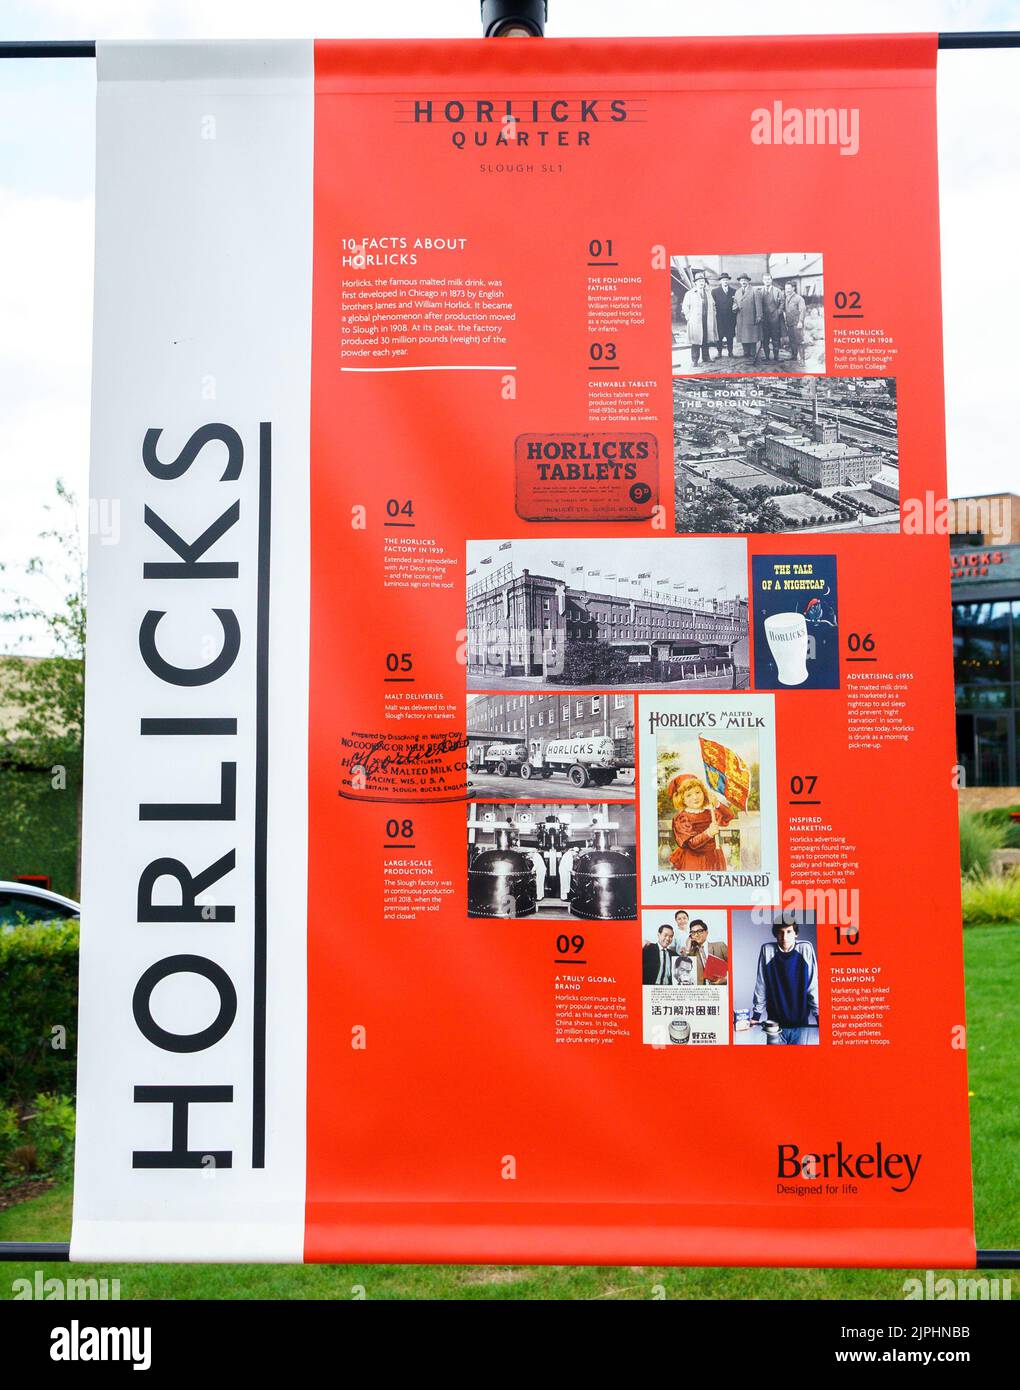 A posted display in the Horlicks Quarter, Slough, Berkshire, setting out the history of the are from decommissioned factory to a housing development. Stock Photo